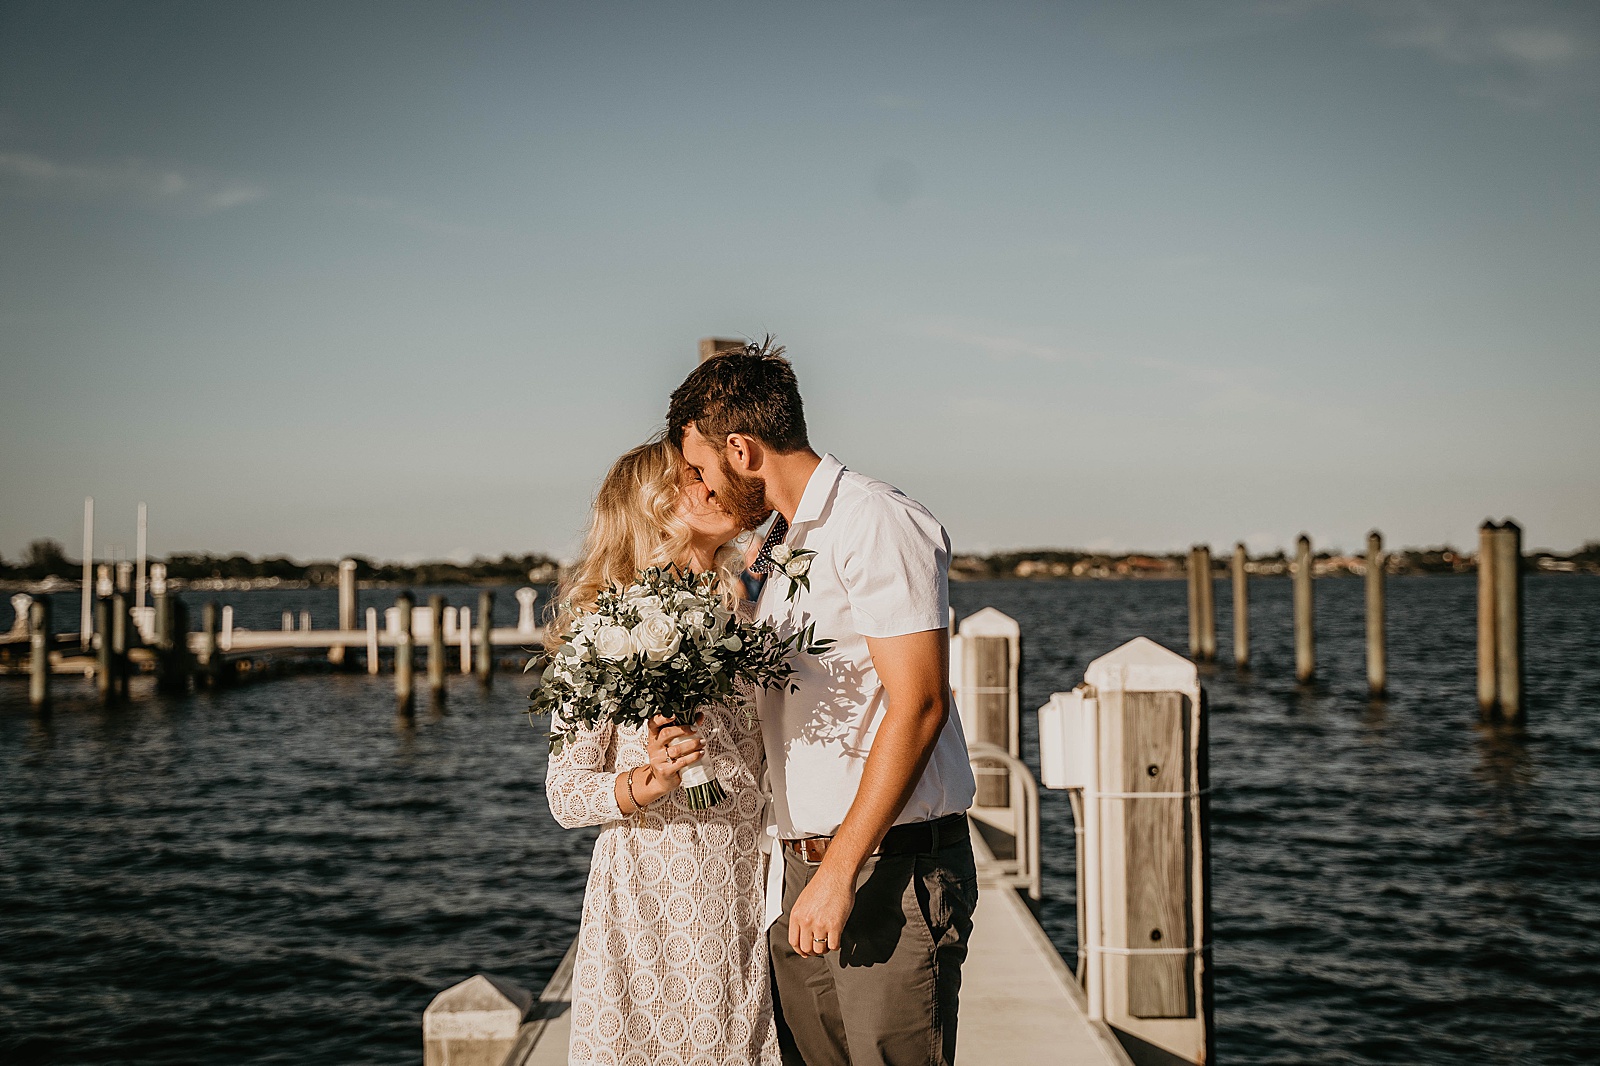 South Florida Waterfront Elopement captured by South Florida Elopement Photographer, Krystal Capone Photography